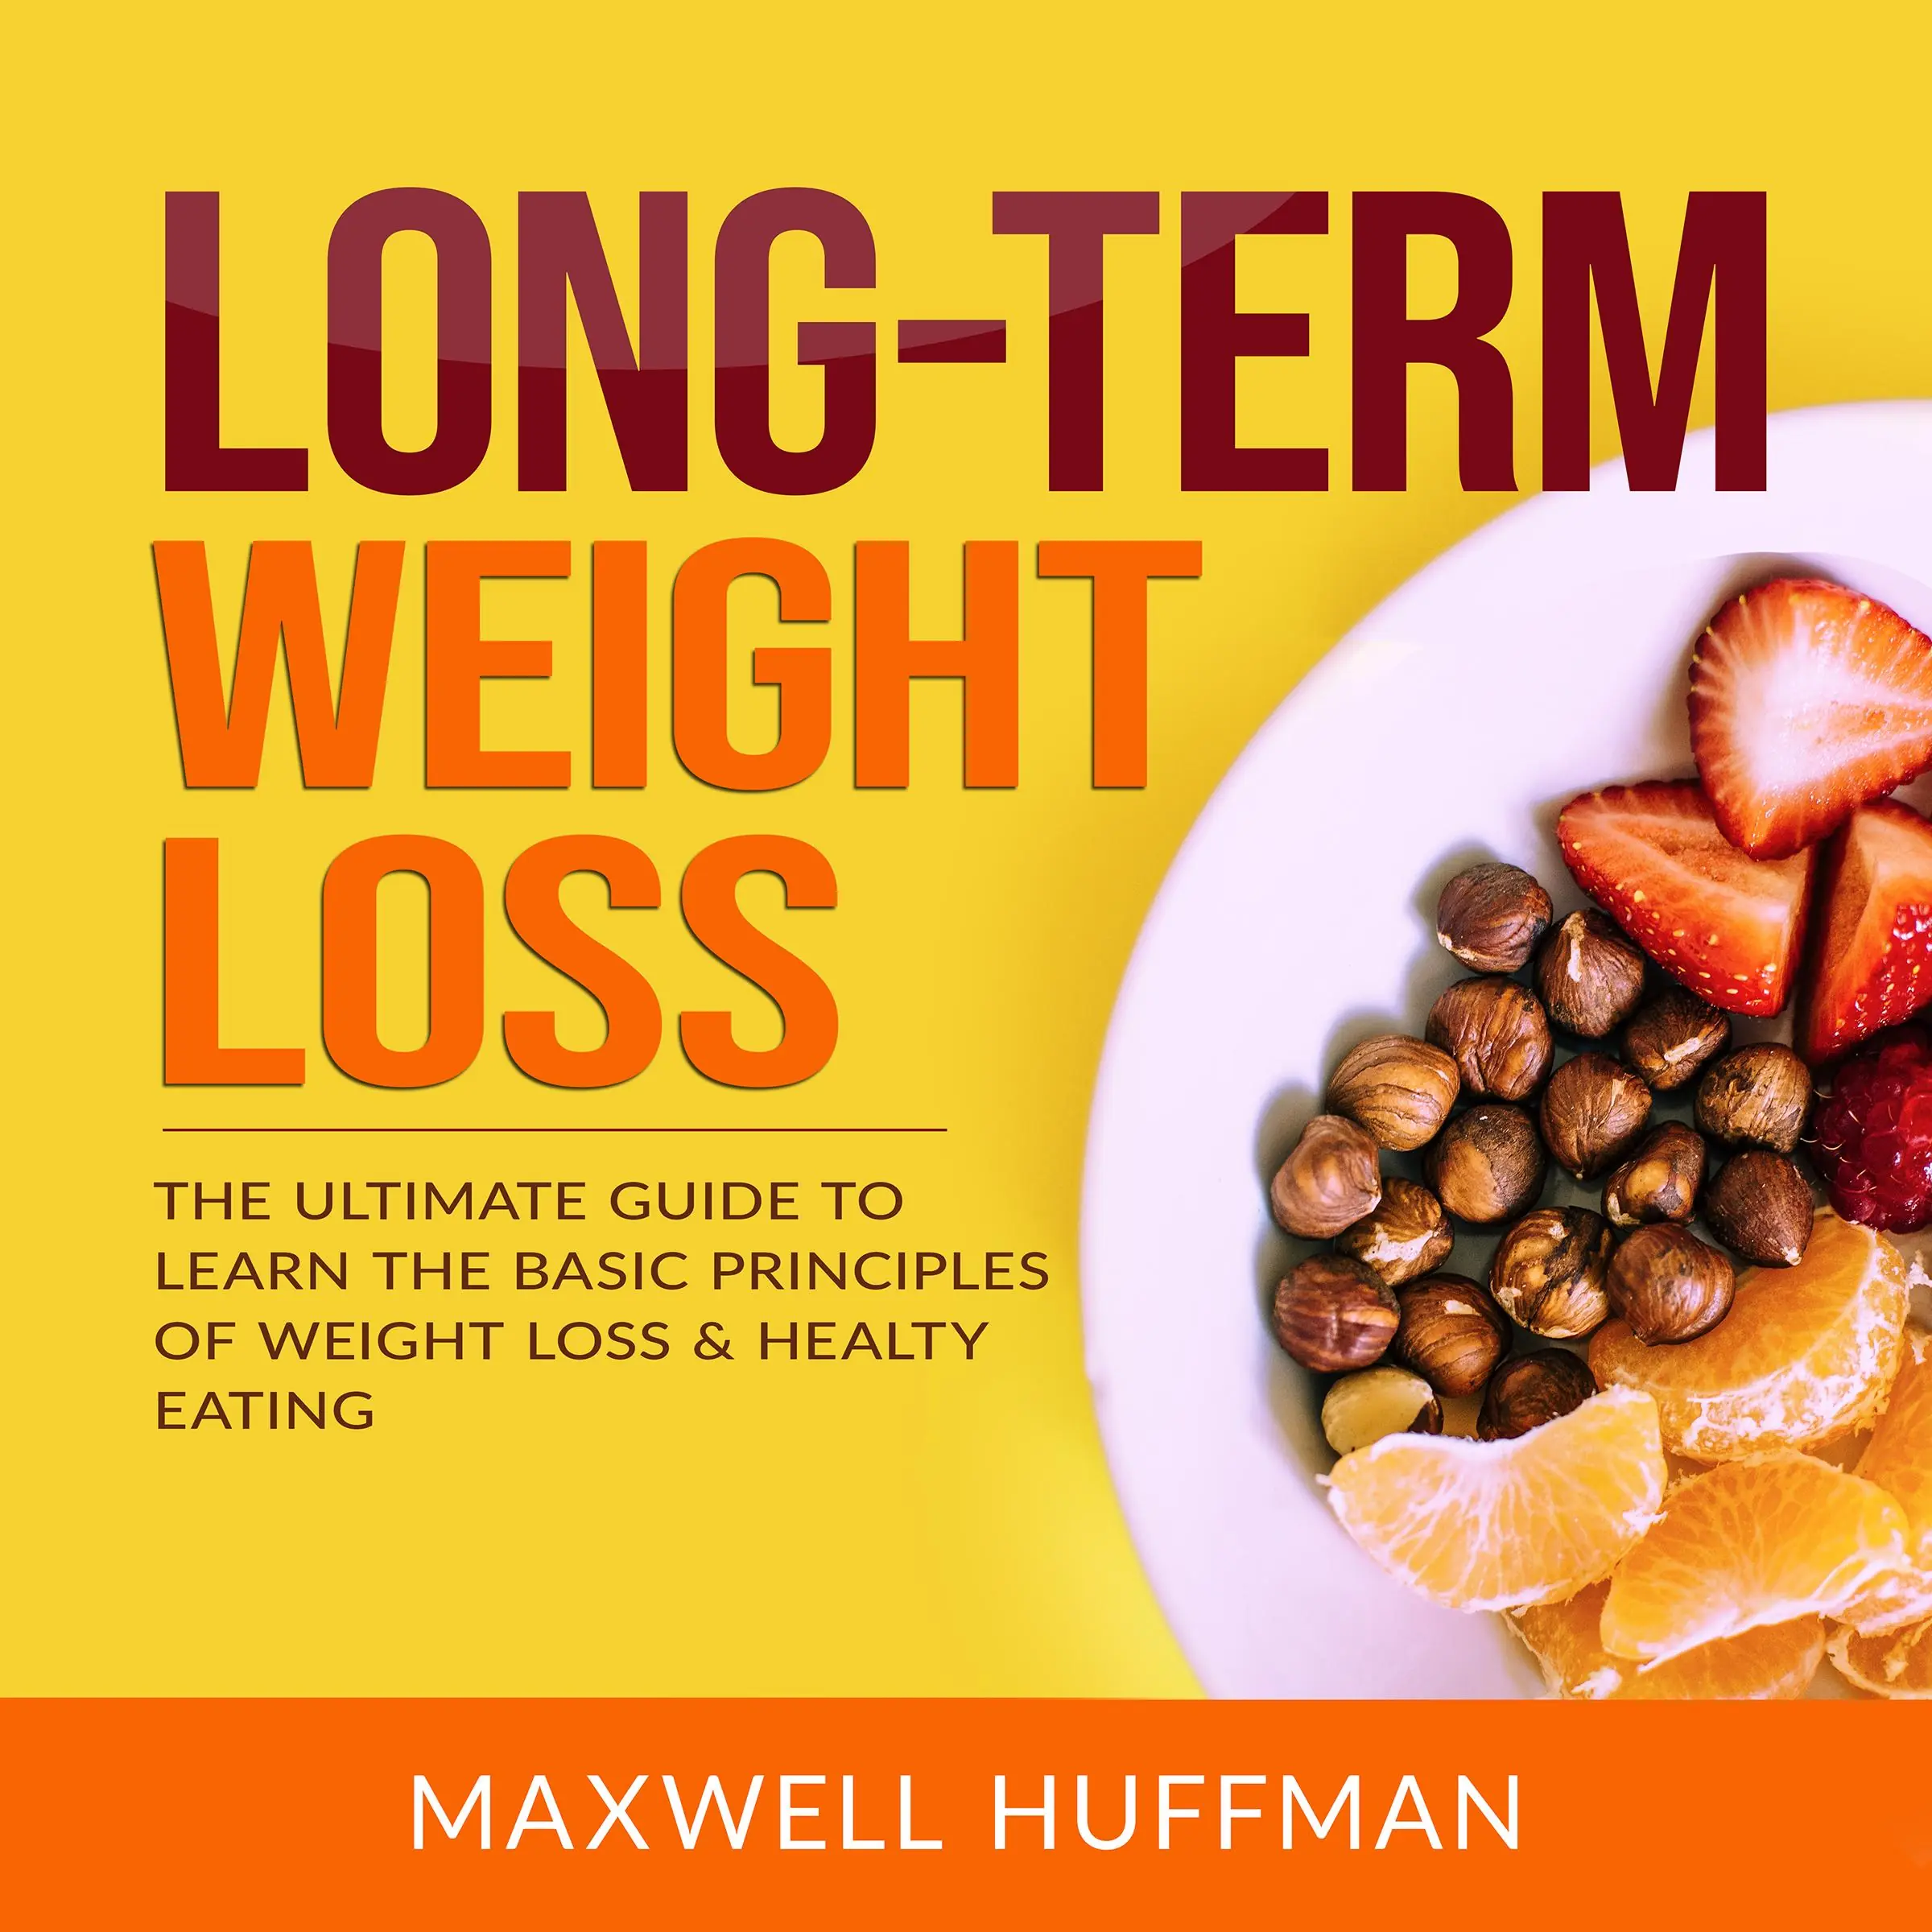 Long-Term Weight Loss: The Ultimate Guide to Learn The Basic Principles of Weight Loss & Healty Eating Audiobook by Maxwell Huffman